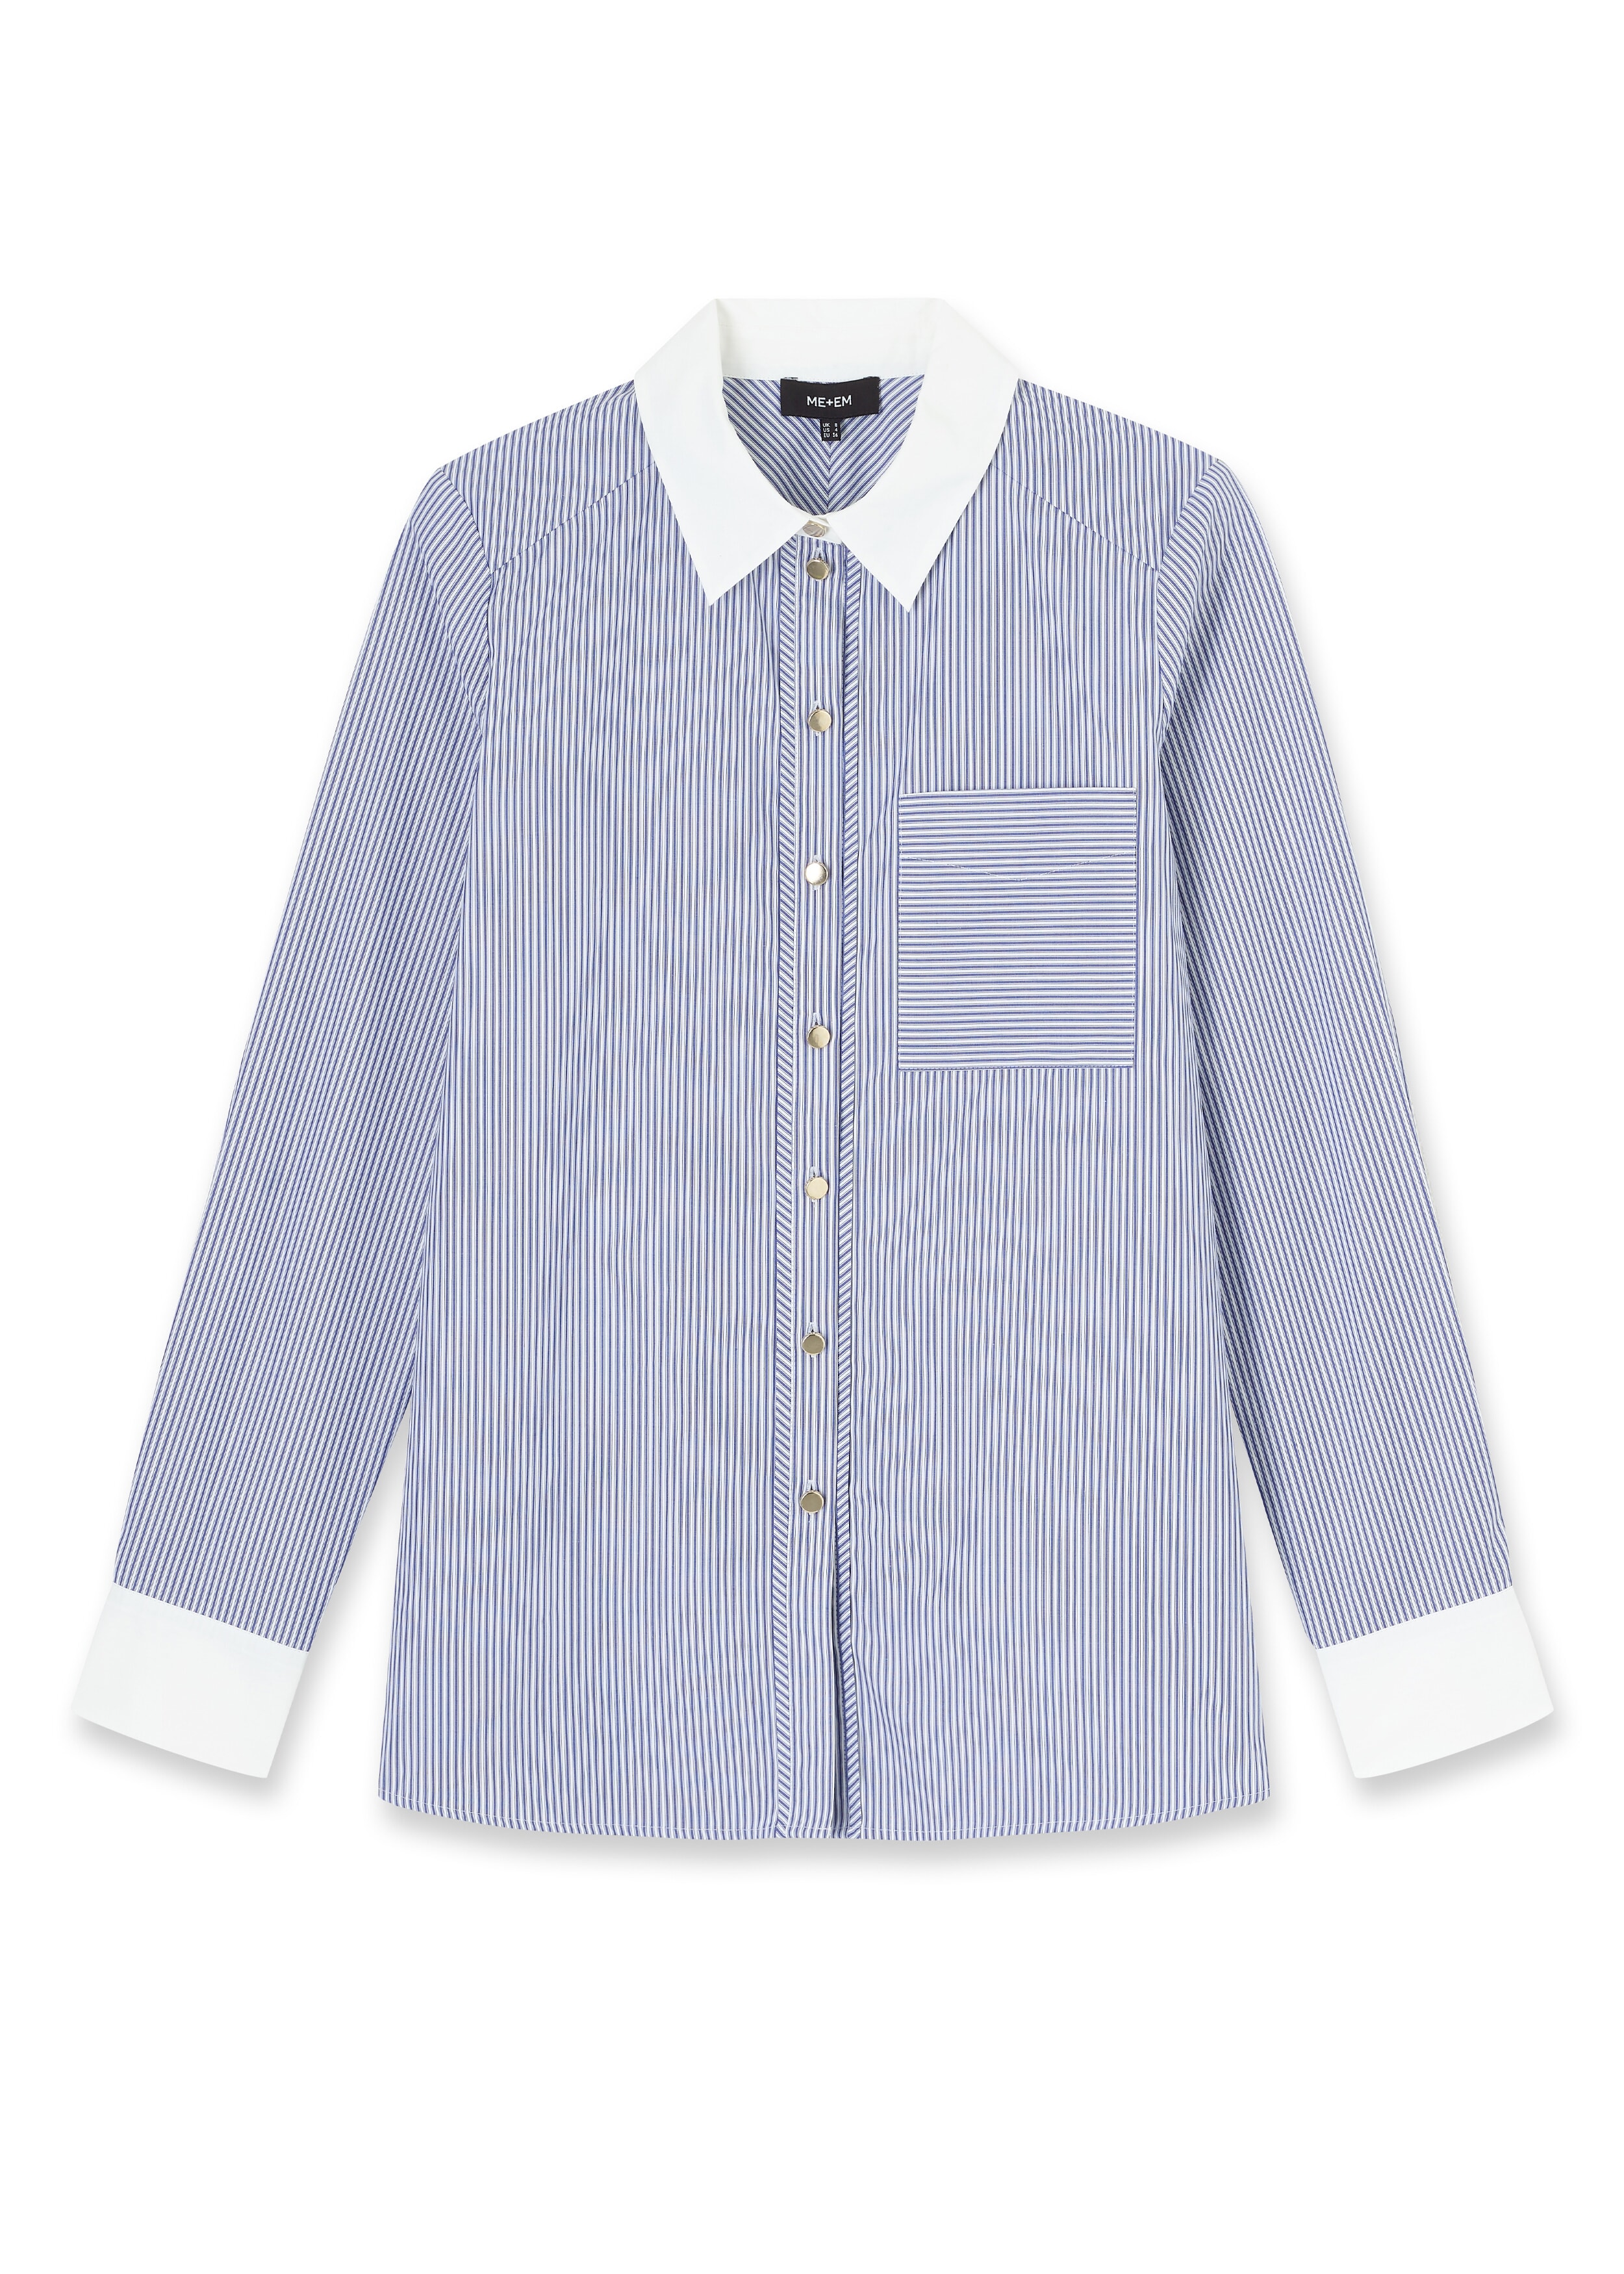 Relaxed Feature Button Striped Shirt Navy/White